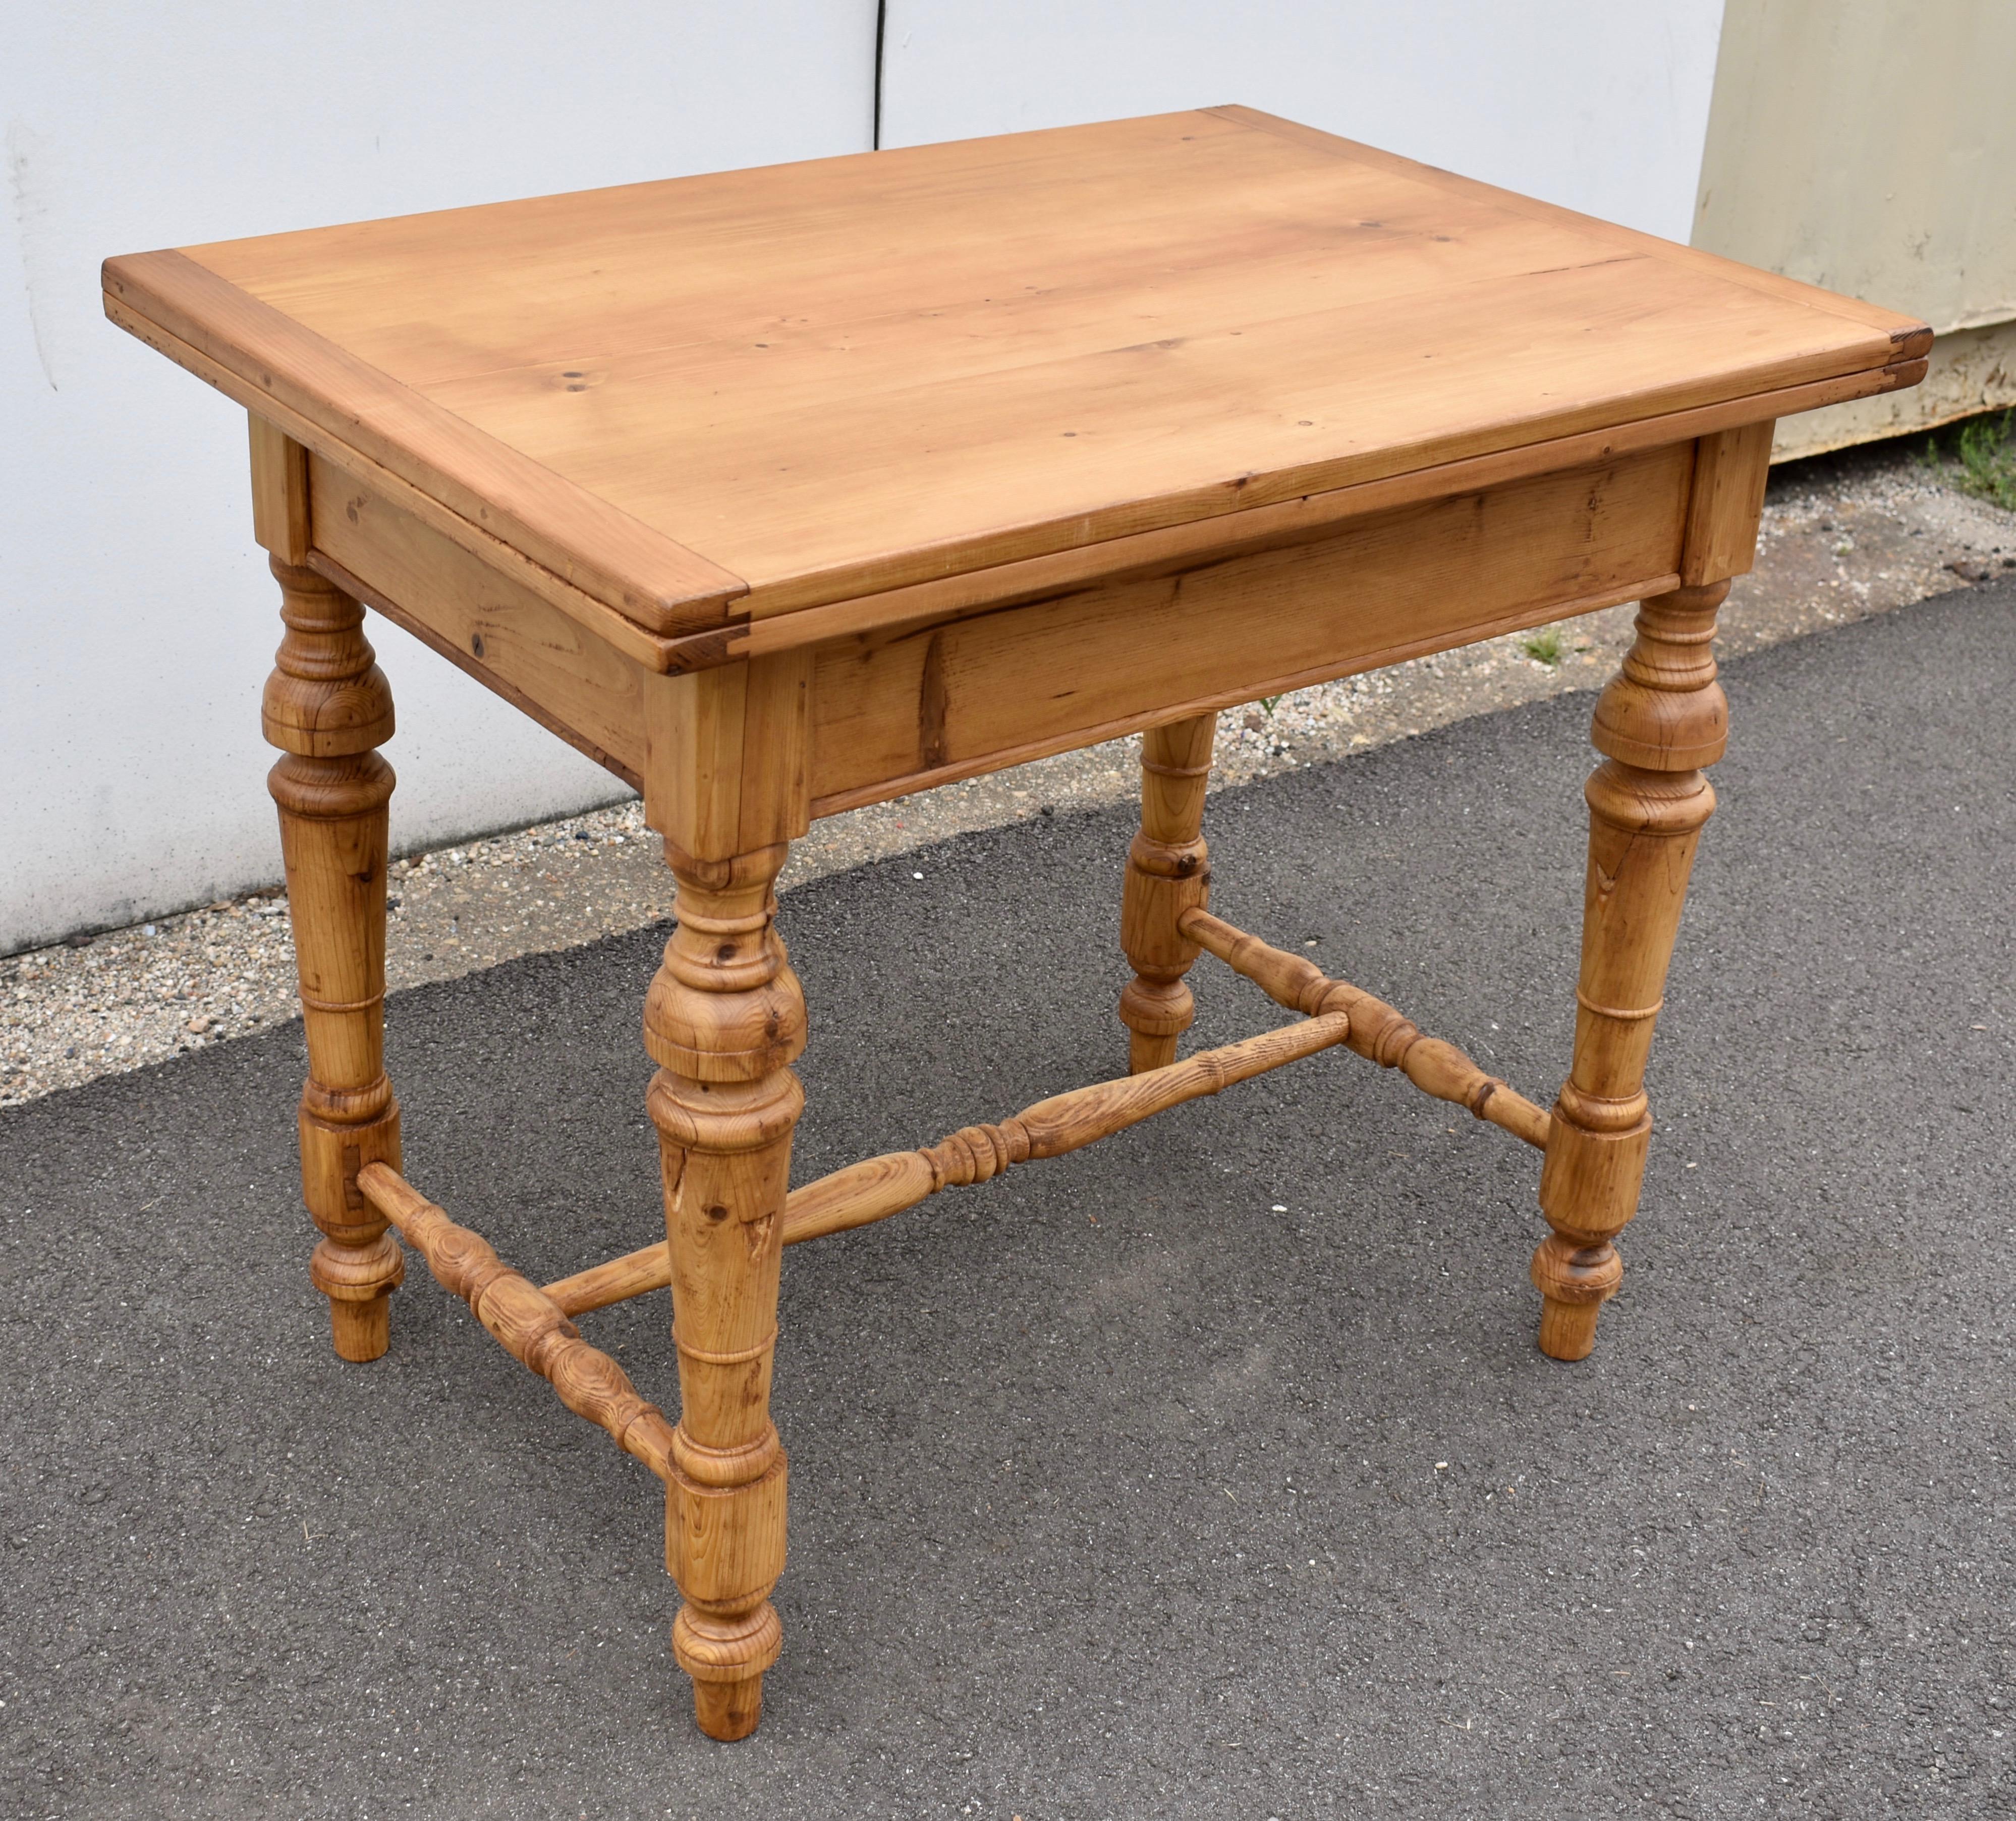 Country Pine Turned Leg Swivel-Top Table